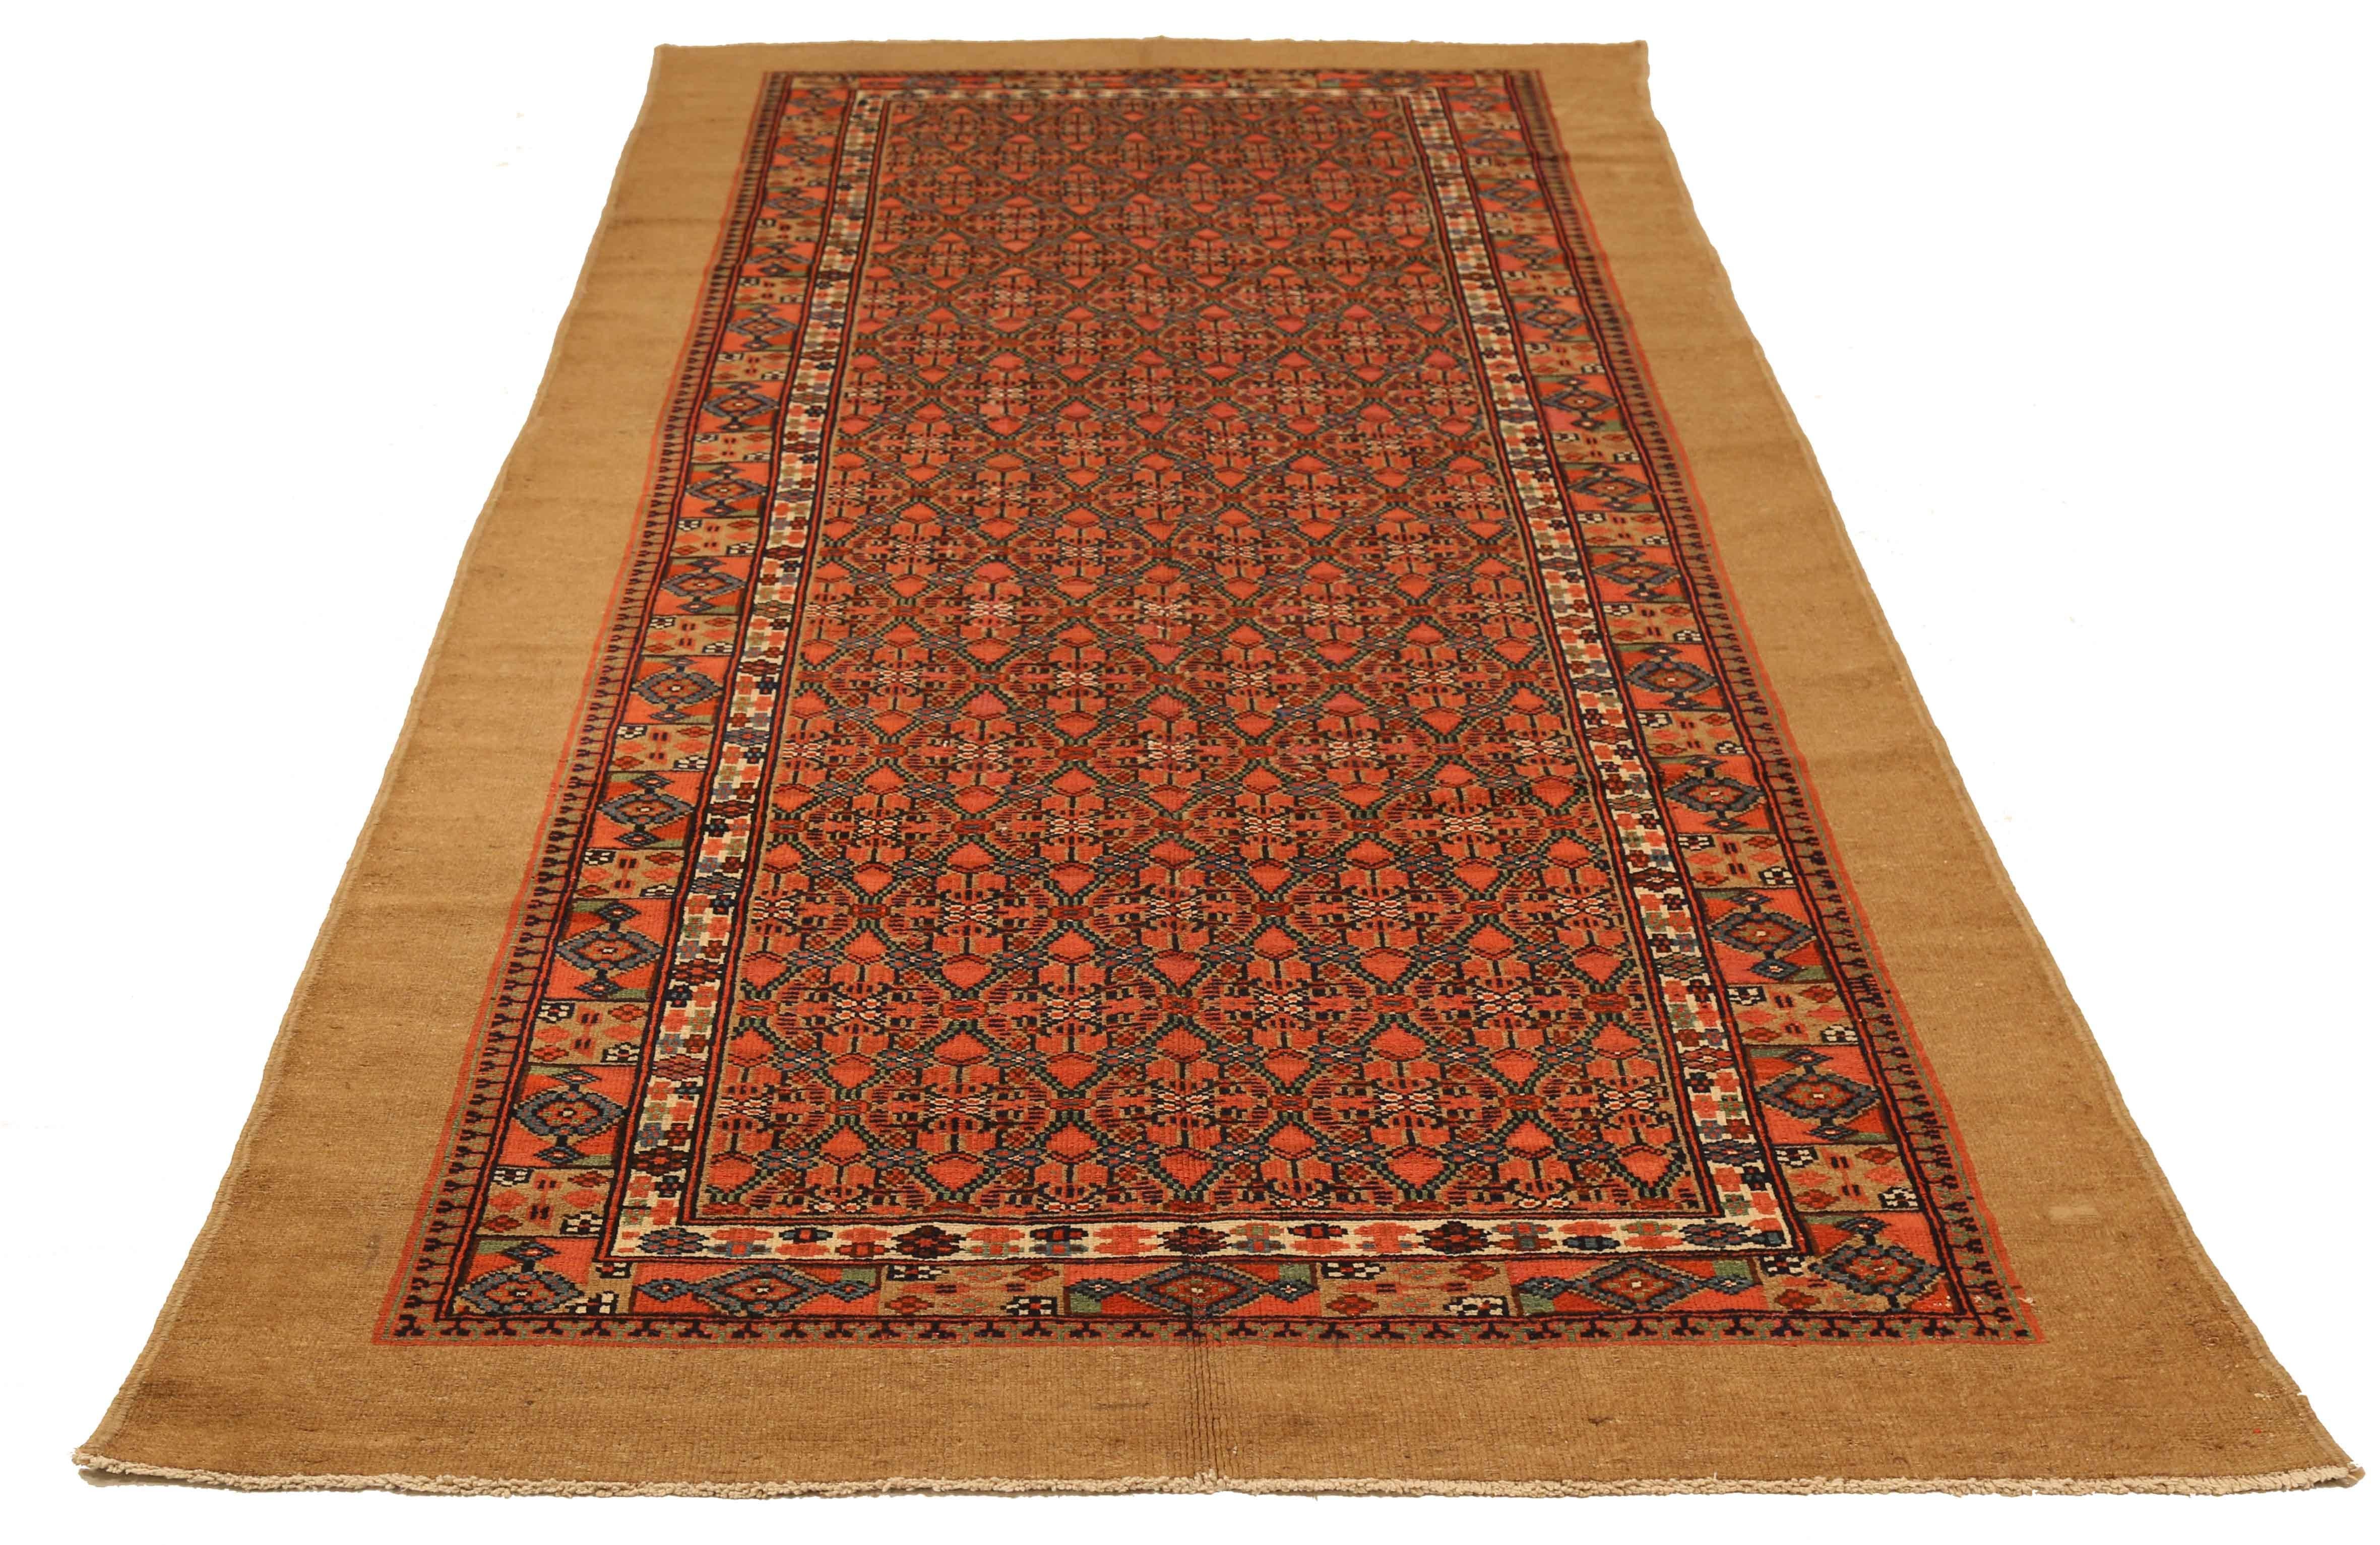 Antique Persian Rug Sarab Design Made of Fine Camel Hair, circa 1920s In Excellent Condition For Sale In Dallas, TX